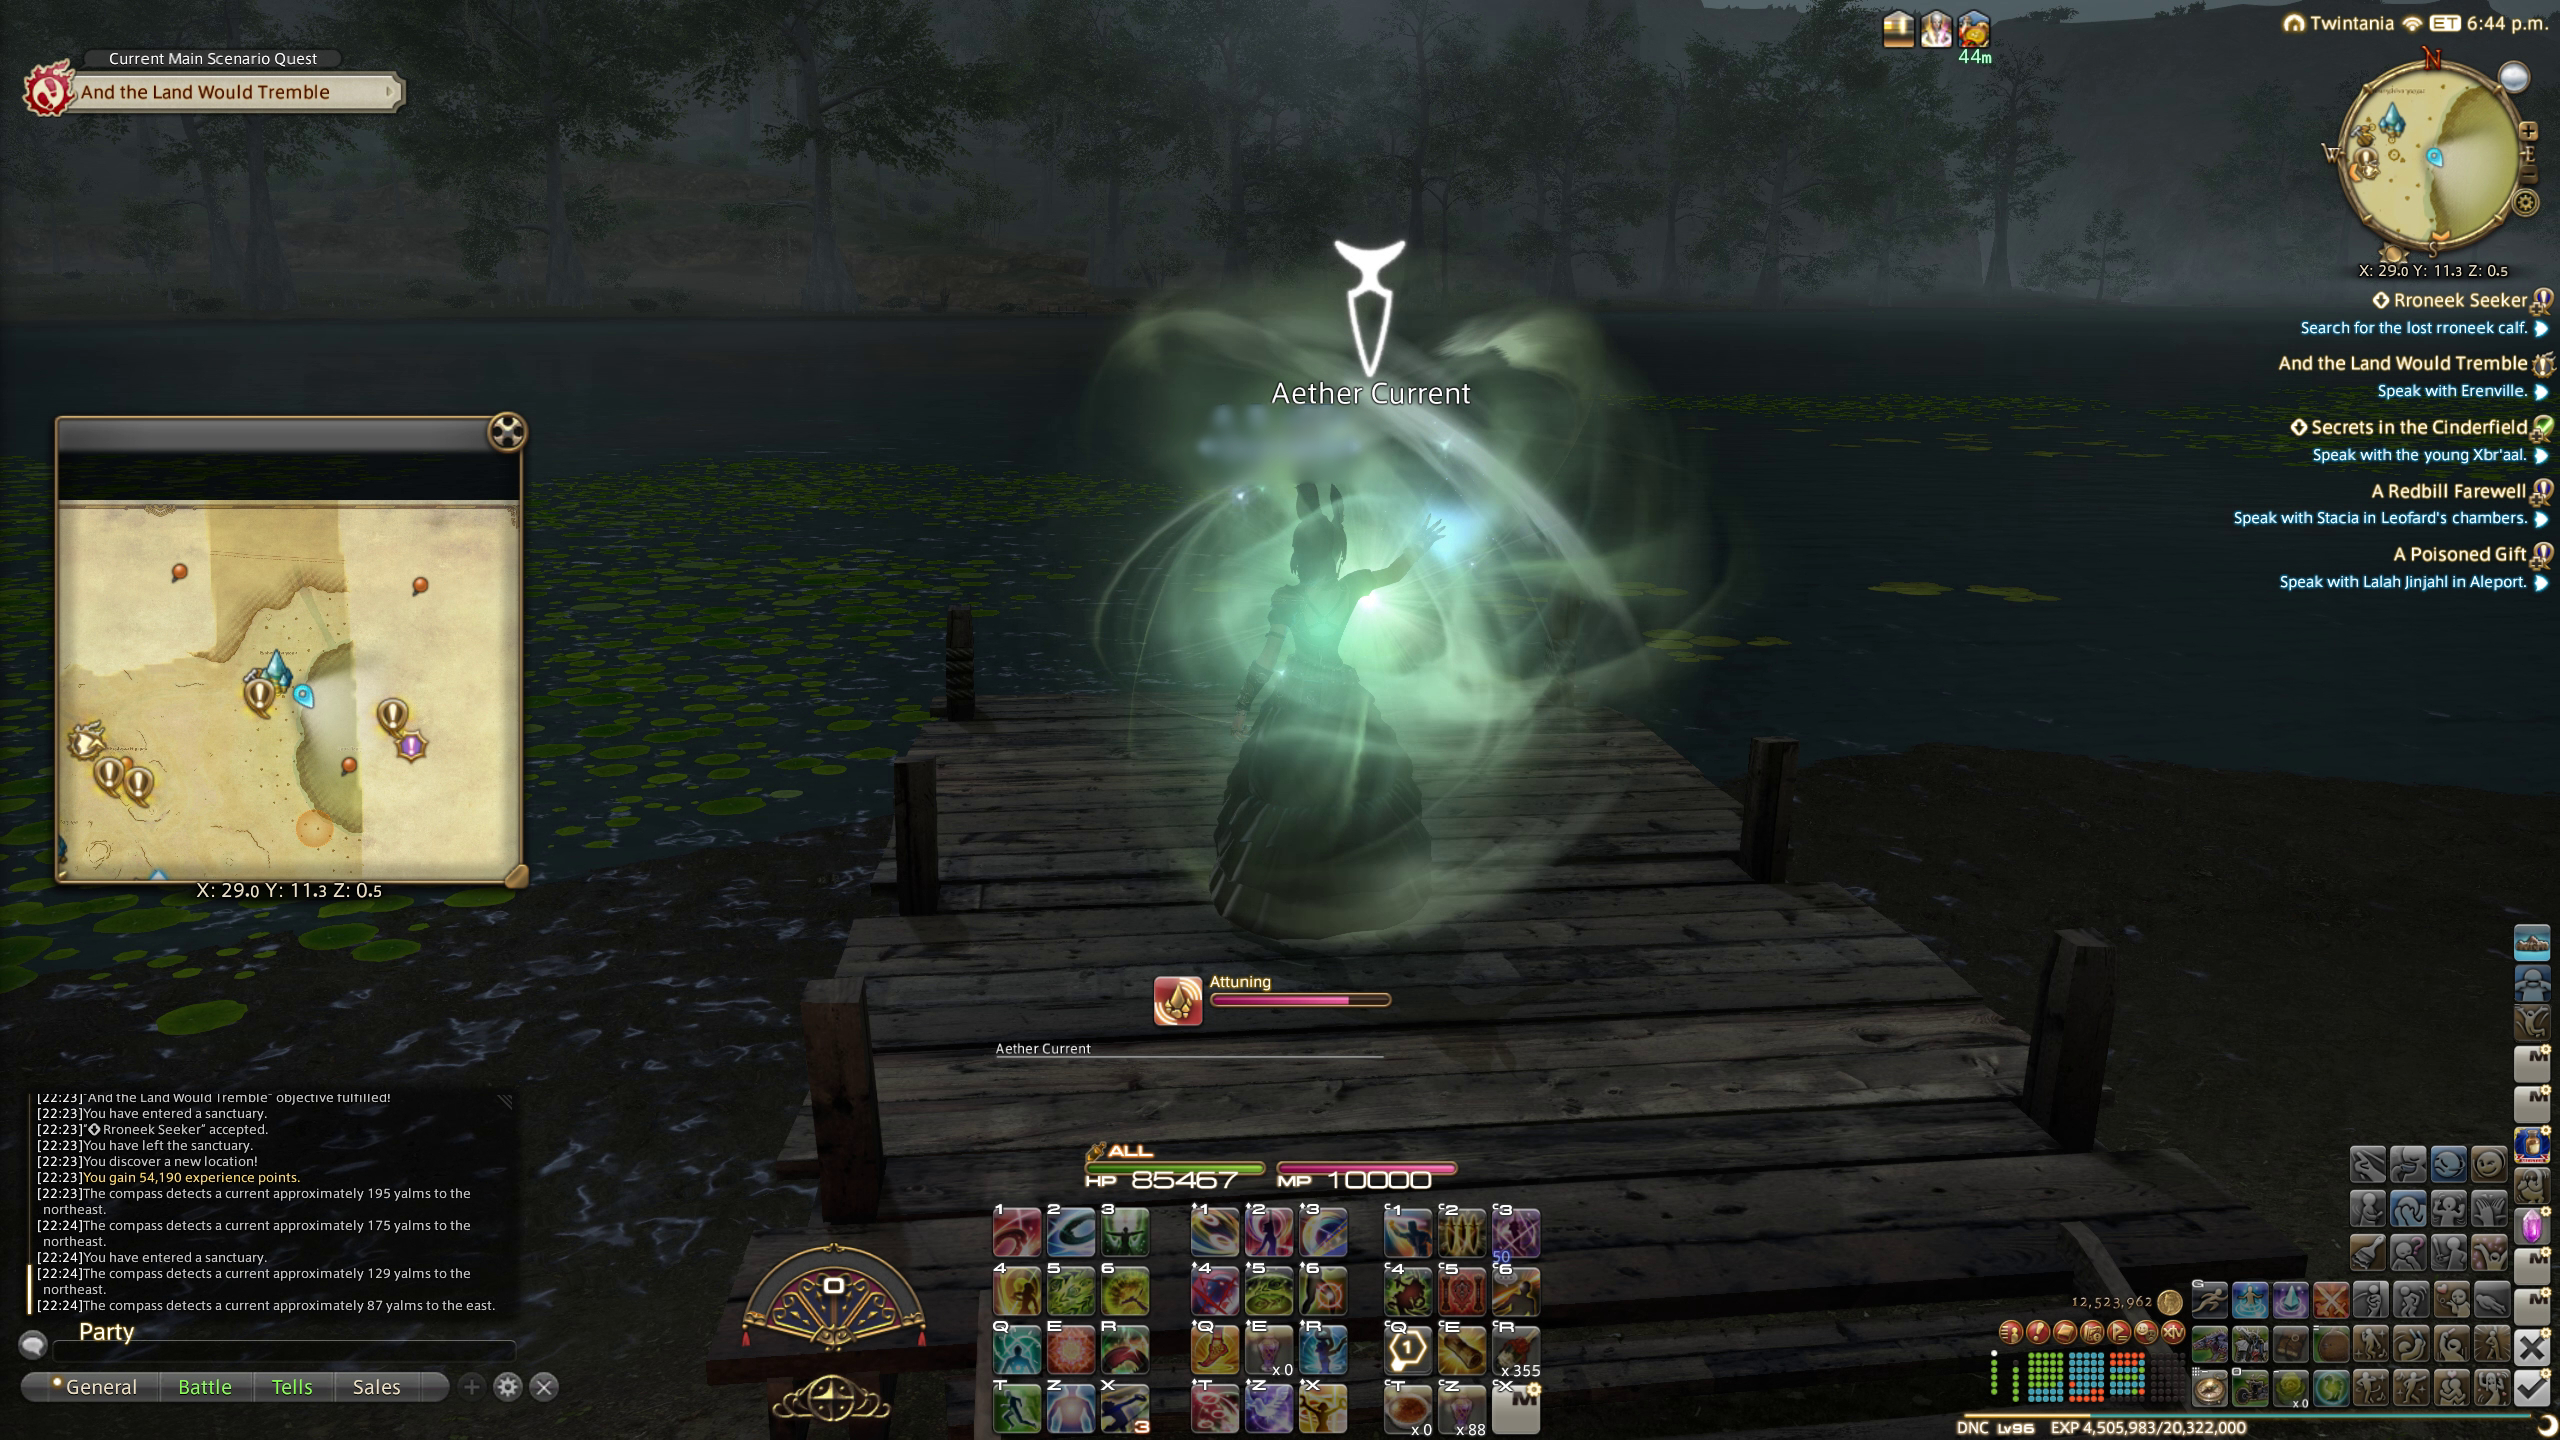 Final Fantasy 14 - A player interacts with a glowing green ball of wind called an Aether Current